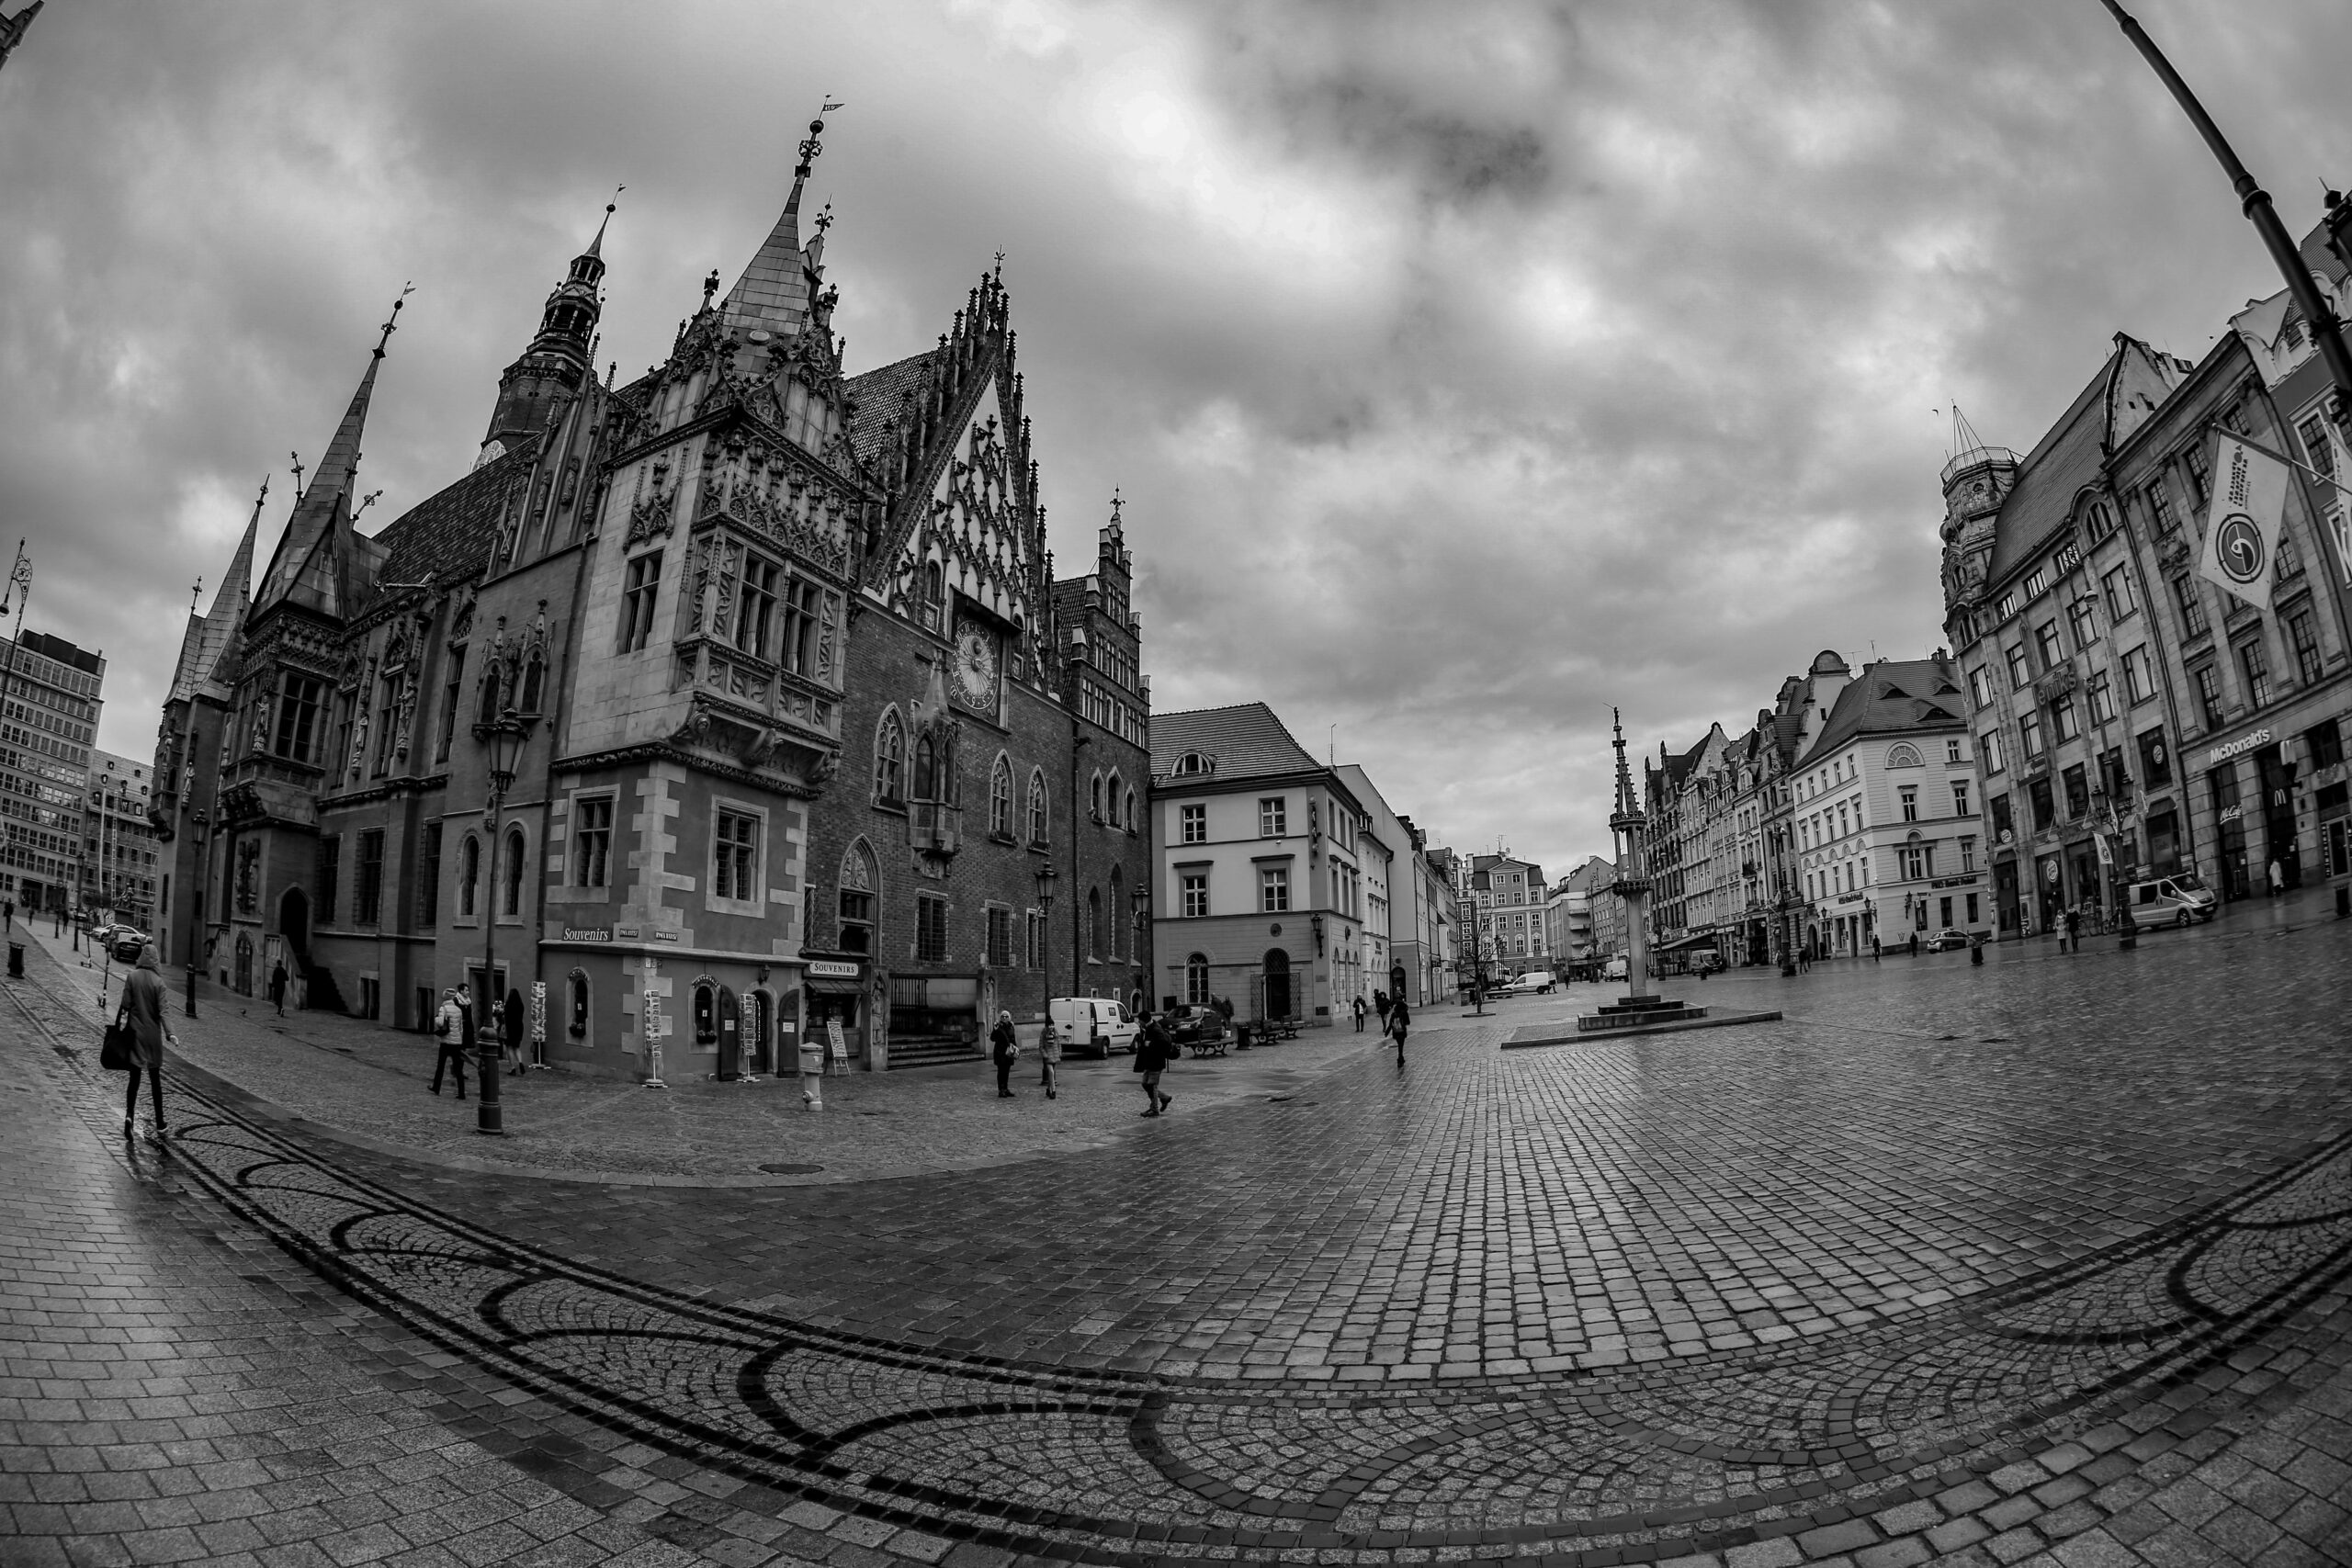 Market Square in Wroclaw, Poland, specifically the Old Town Hall which currently houses the Museum of Bourgeois Art